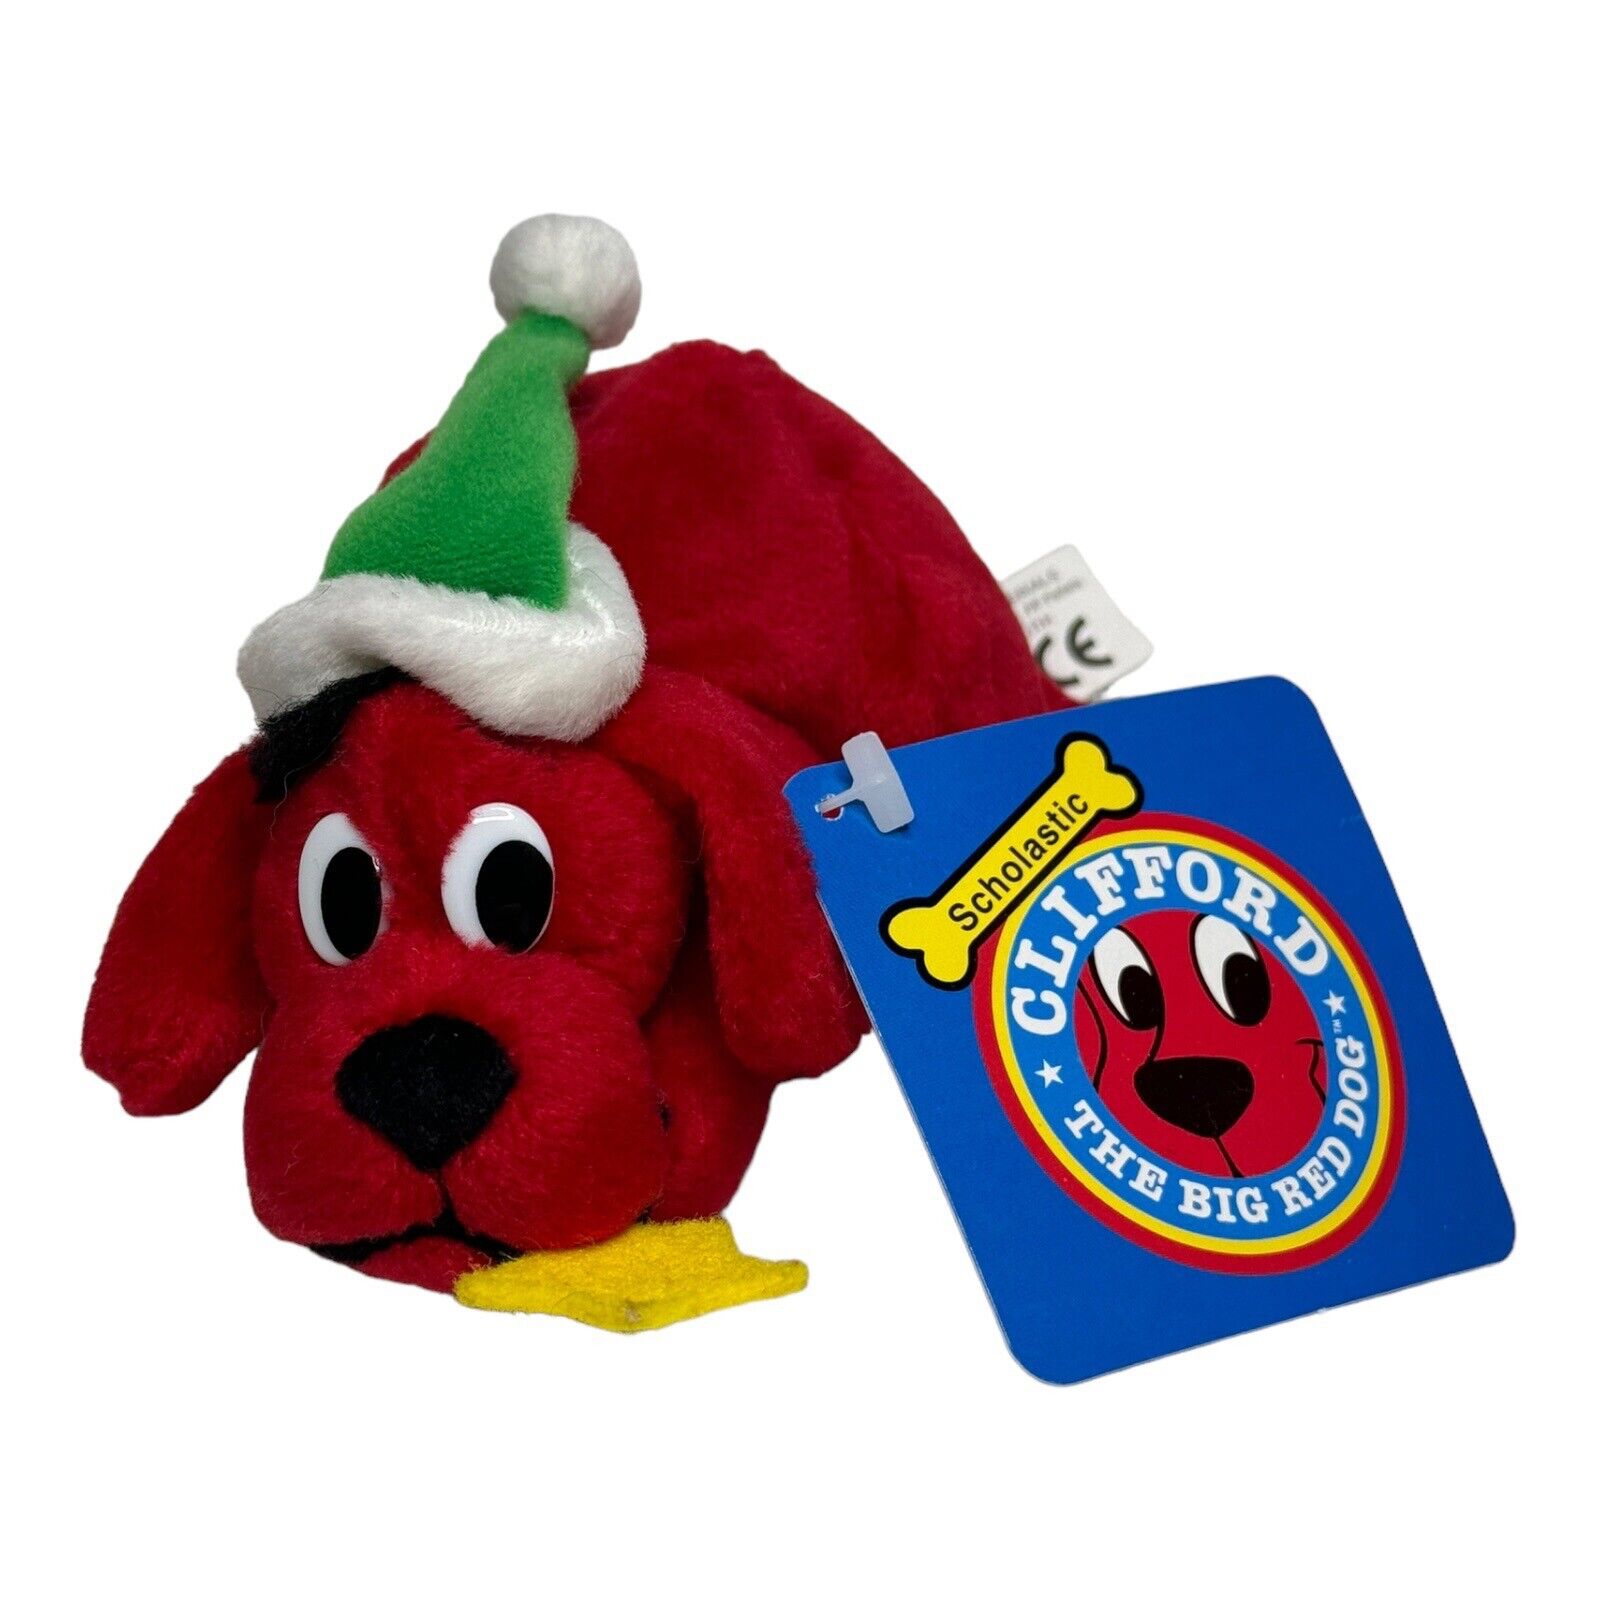 Clifford the Big Red Dog Plush Christmas Scholastic Bean Bag NEW With Tags